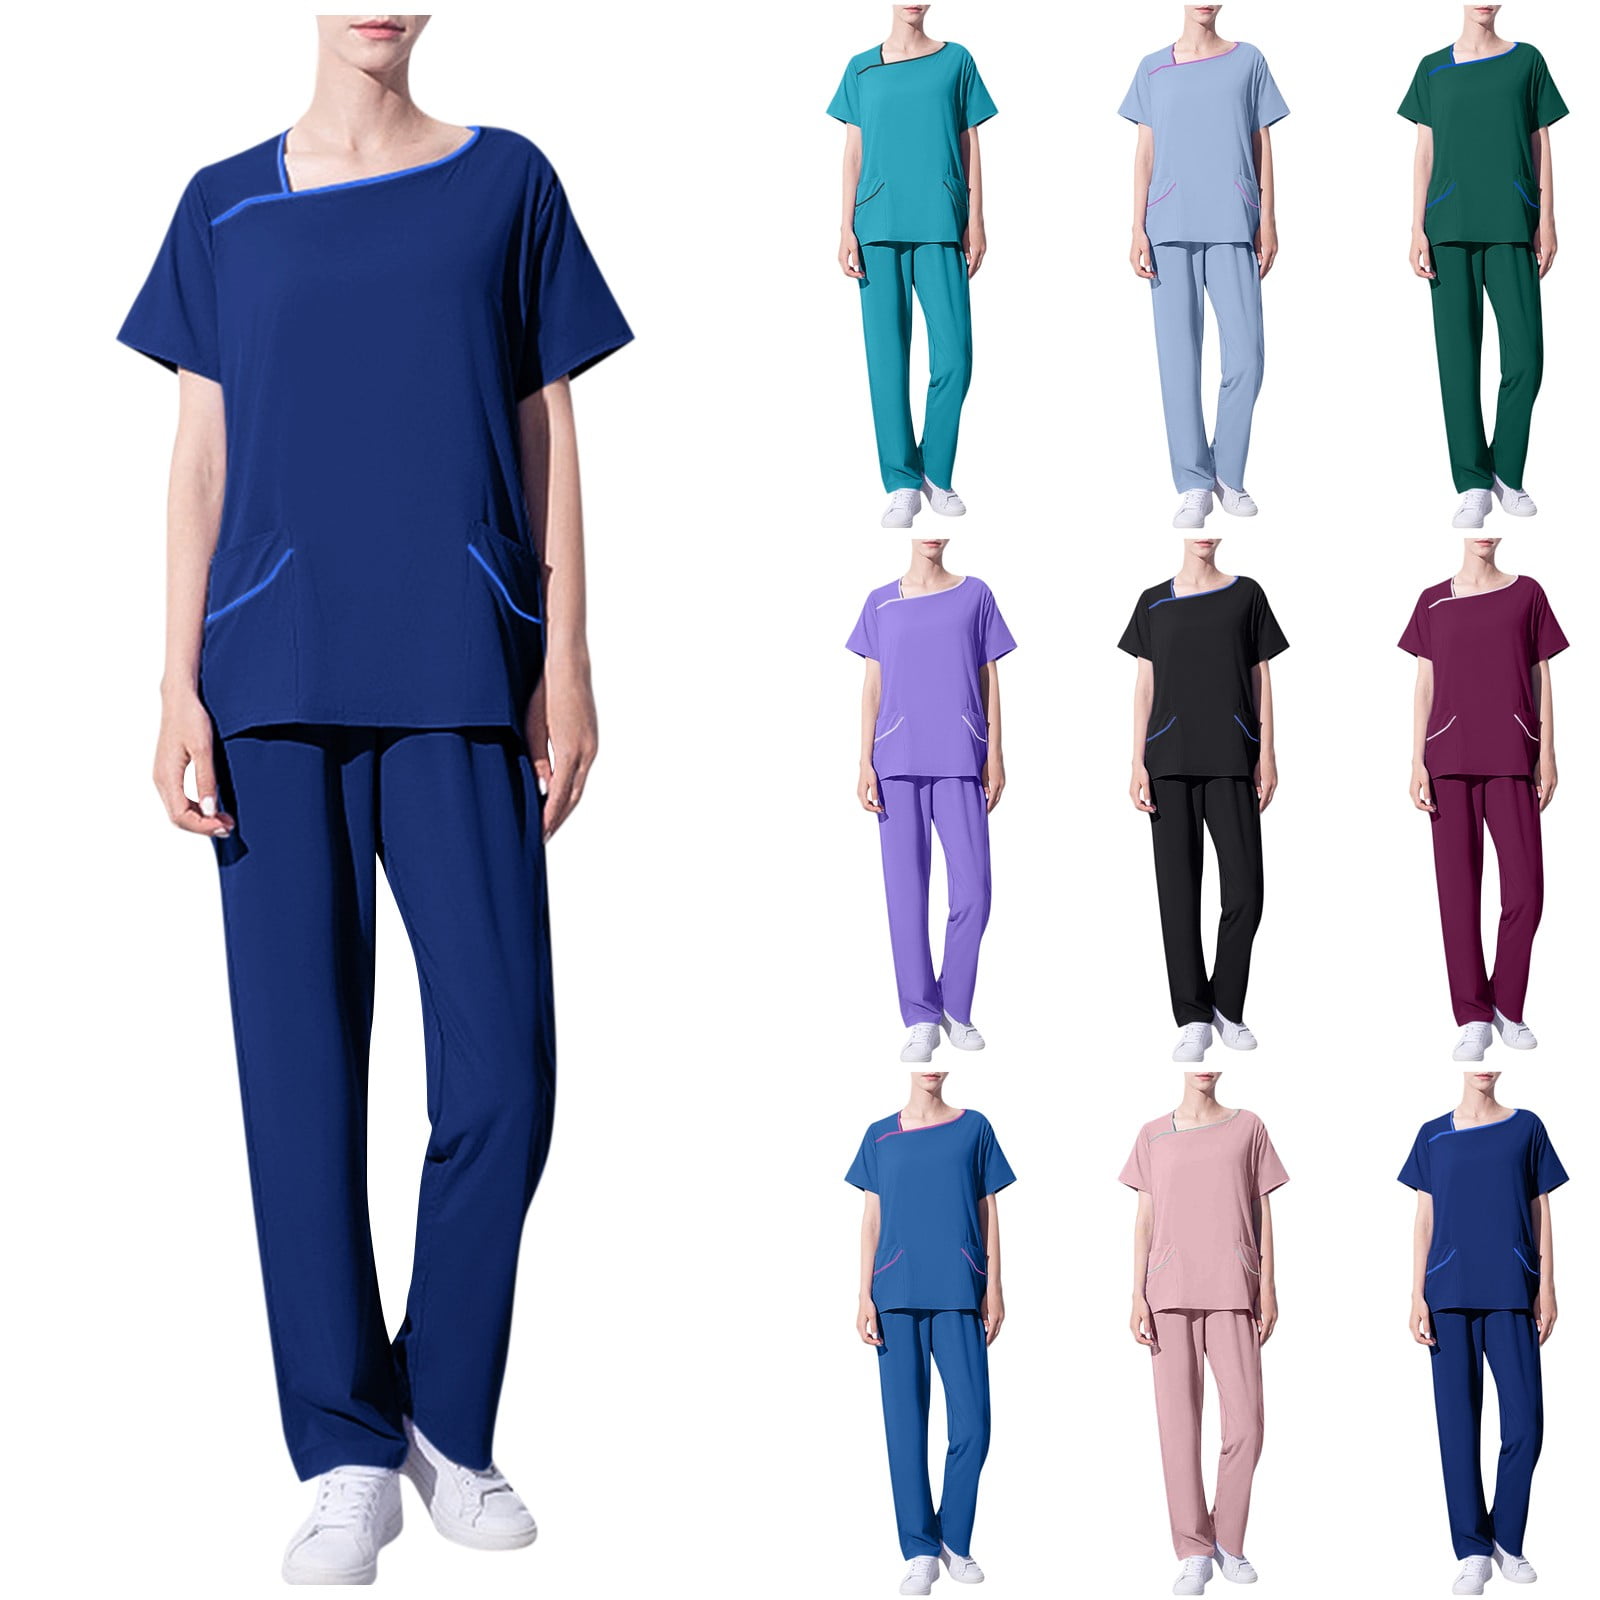 Bazyrey Women Plus Size Scrub Tops Women's Solid Color Square Collar ...